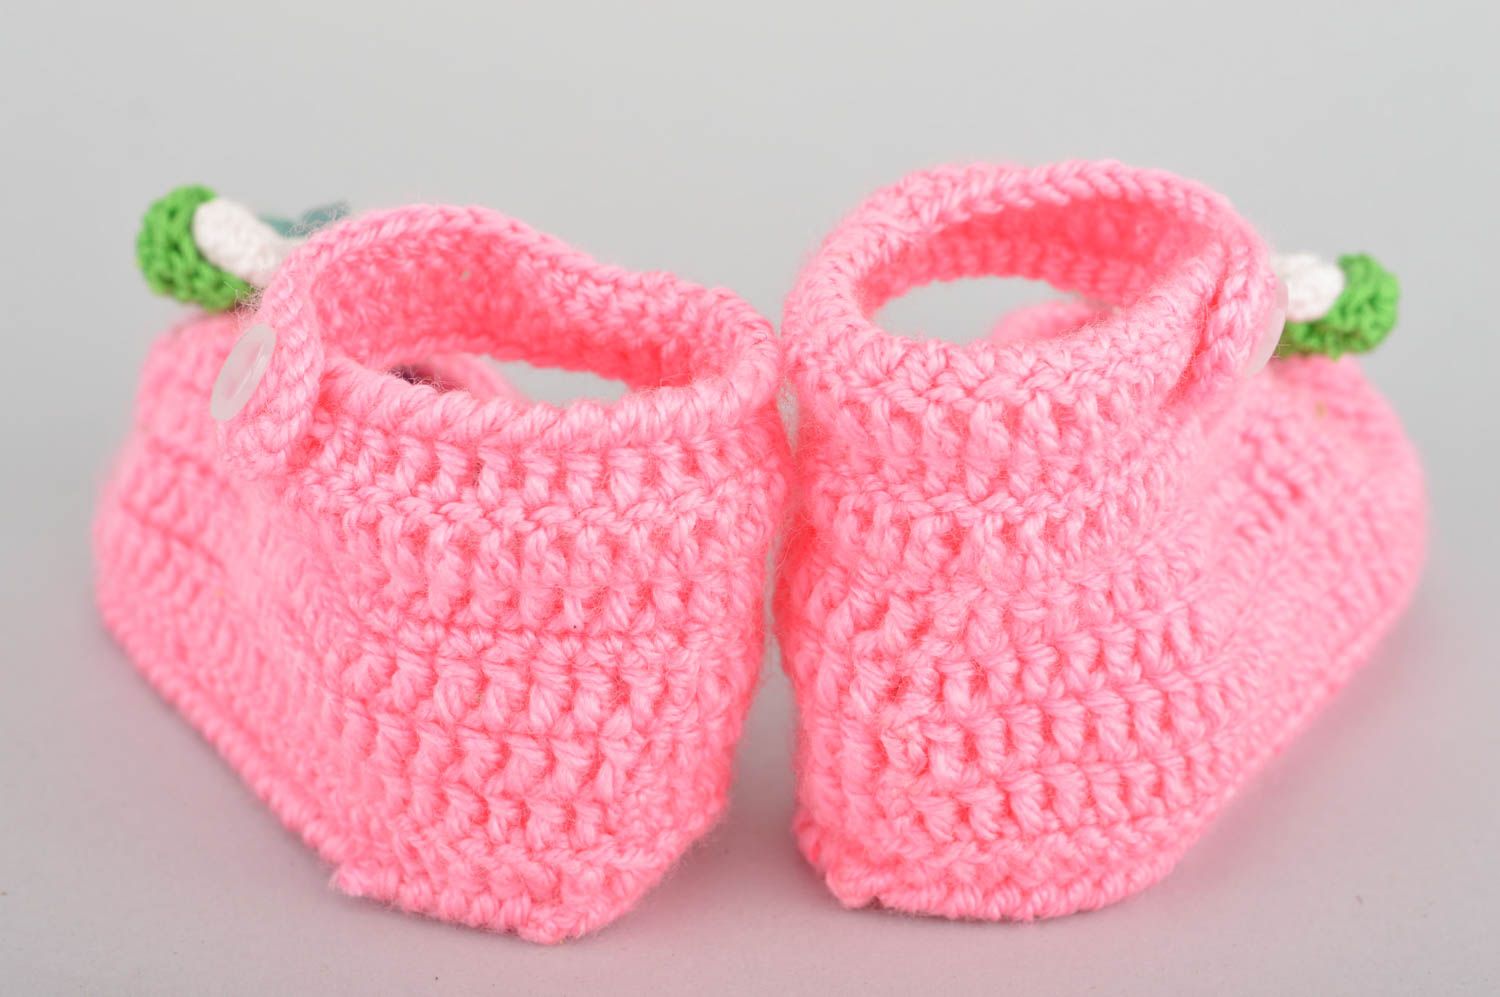 Crocheted designer handmade pink baby bootees made of cotton for girls photo 5